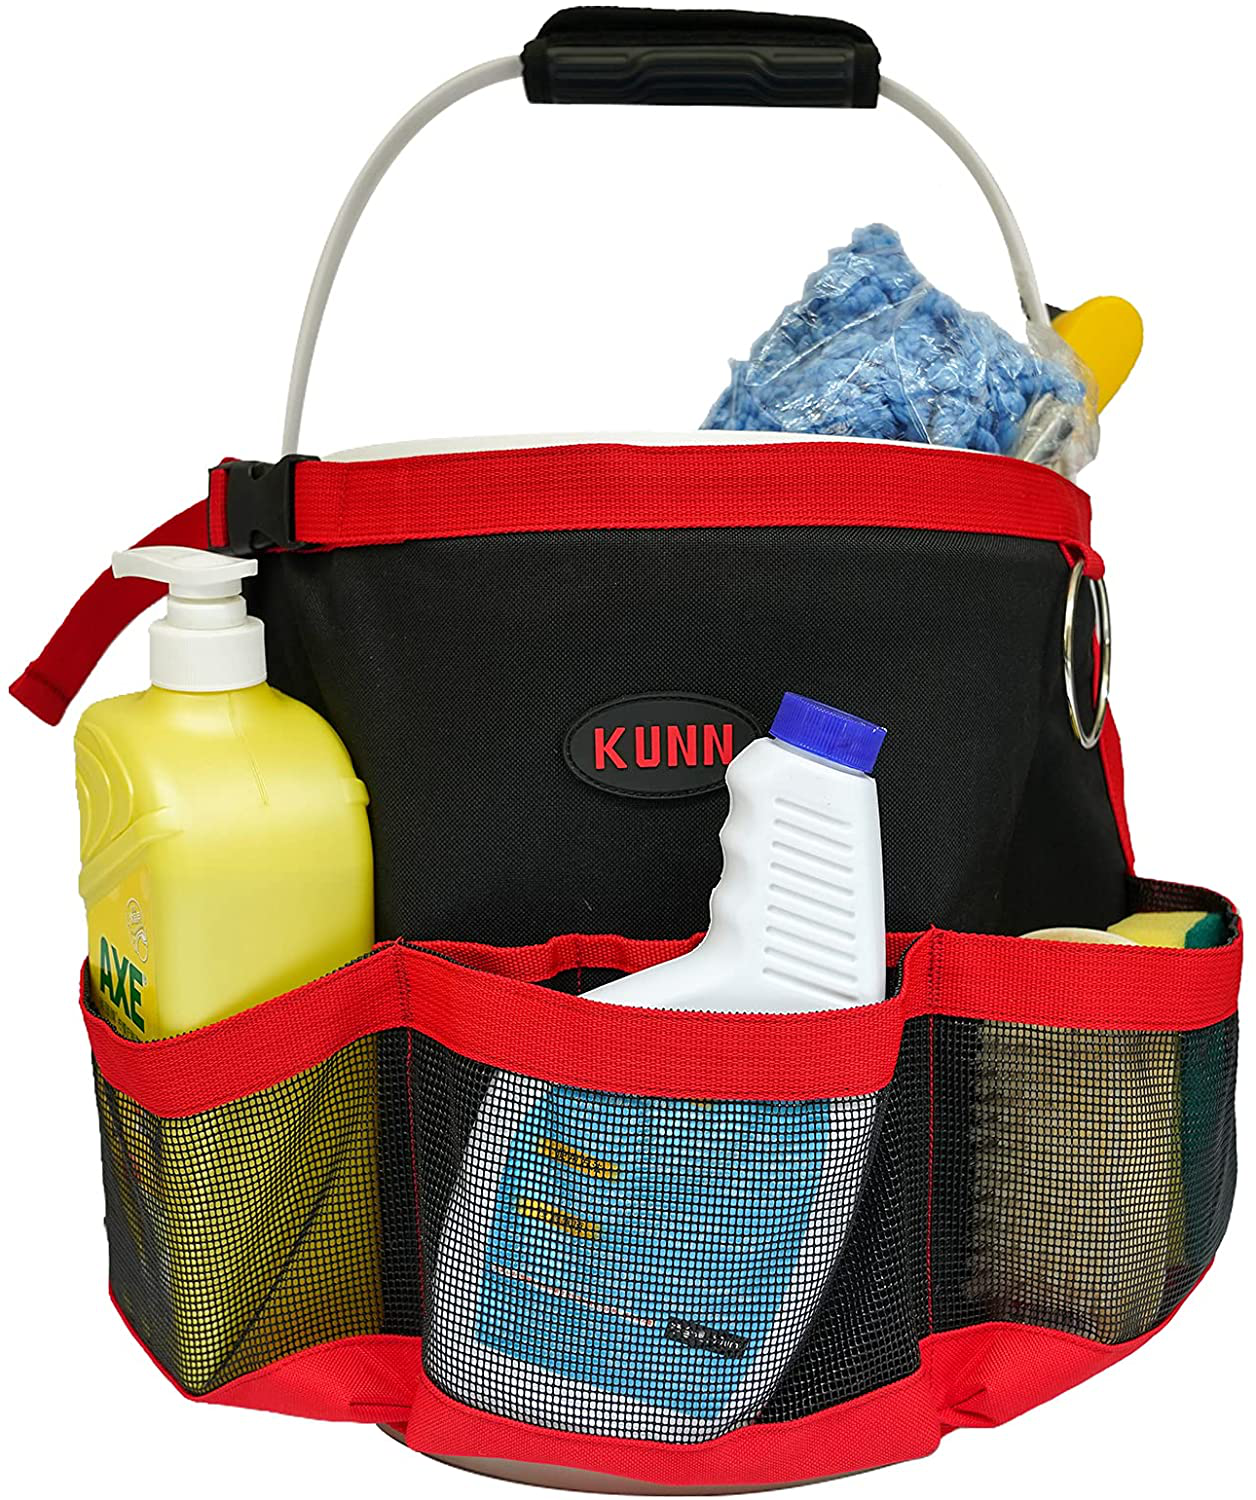 KUNN Car wash bucket tool organizer for 5 Gallon Bucket with Towel Holder Ring ,Soap pockets cleaning bucket organizer Water-resistant Mesh Pockets for Clean Supplier , Car Wash Supplier